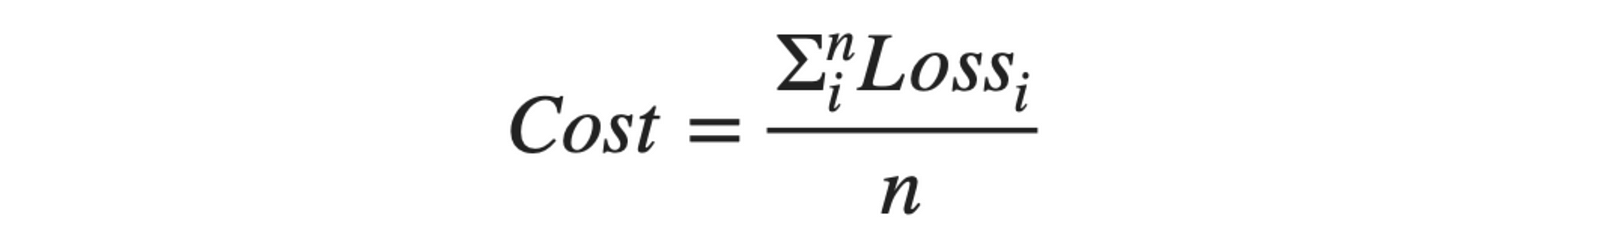 Binary cross entropy cost function in terms of loss function